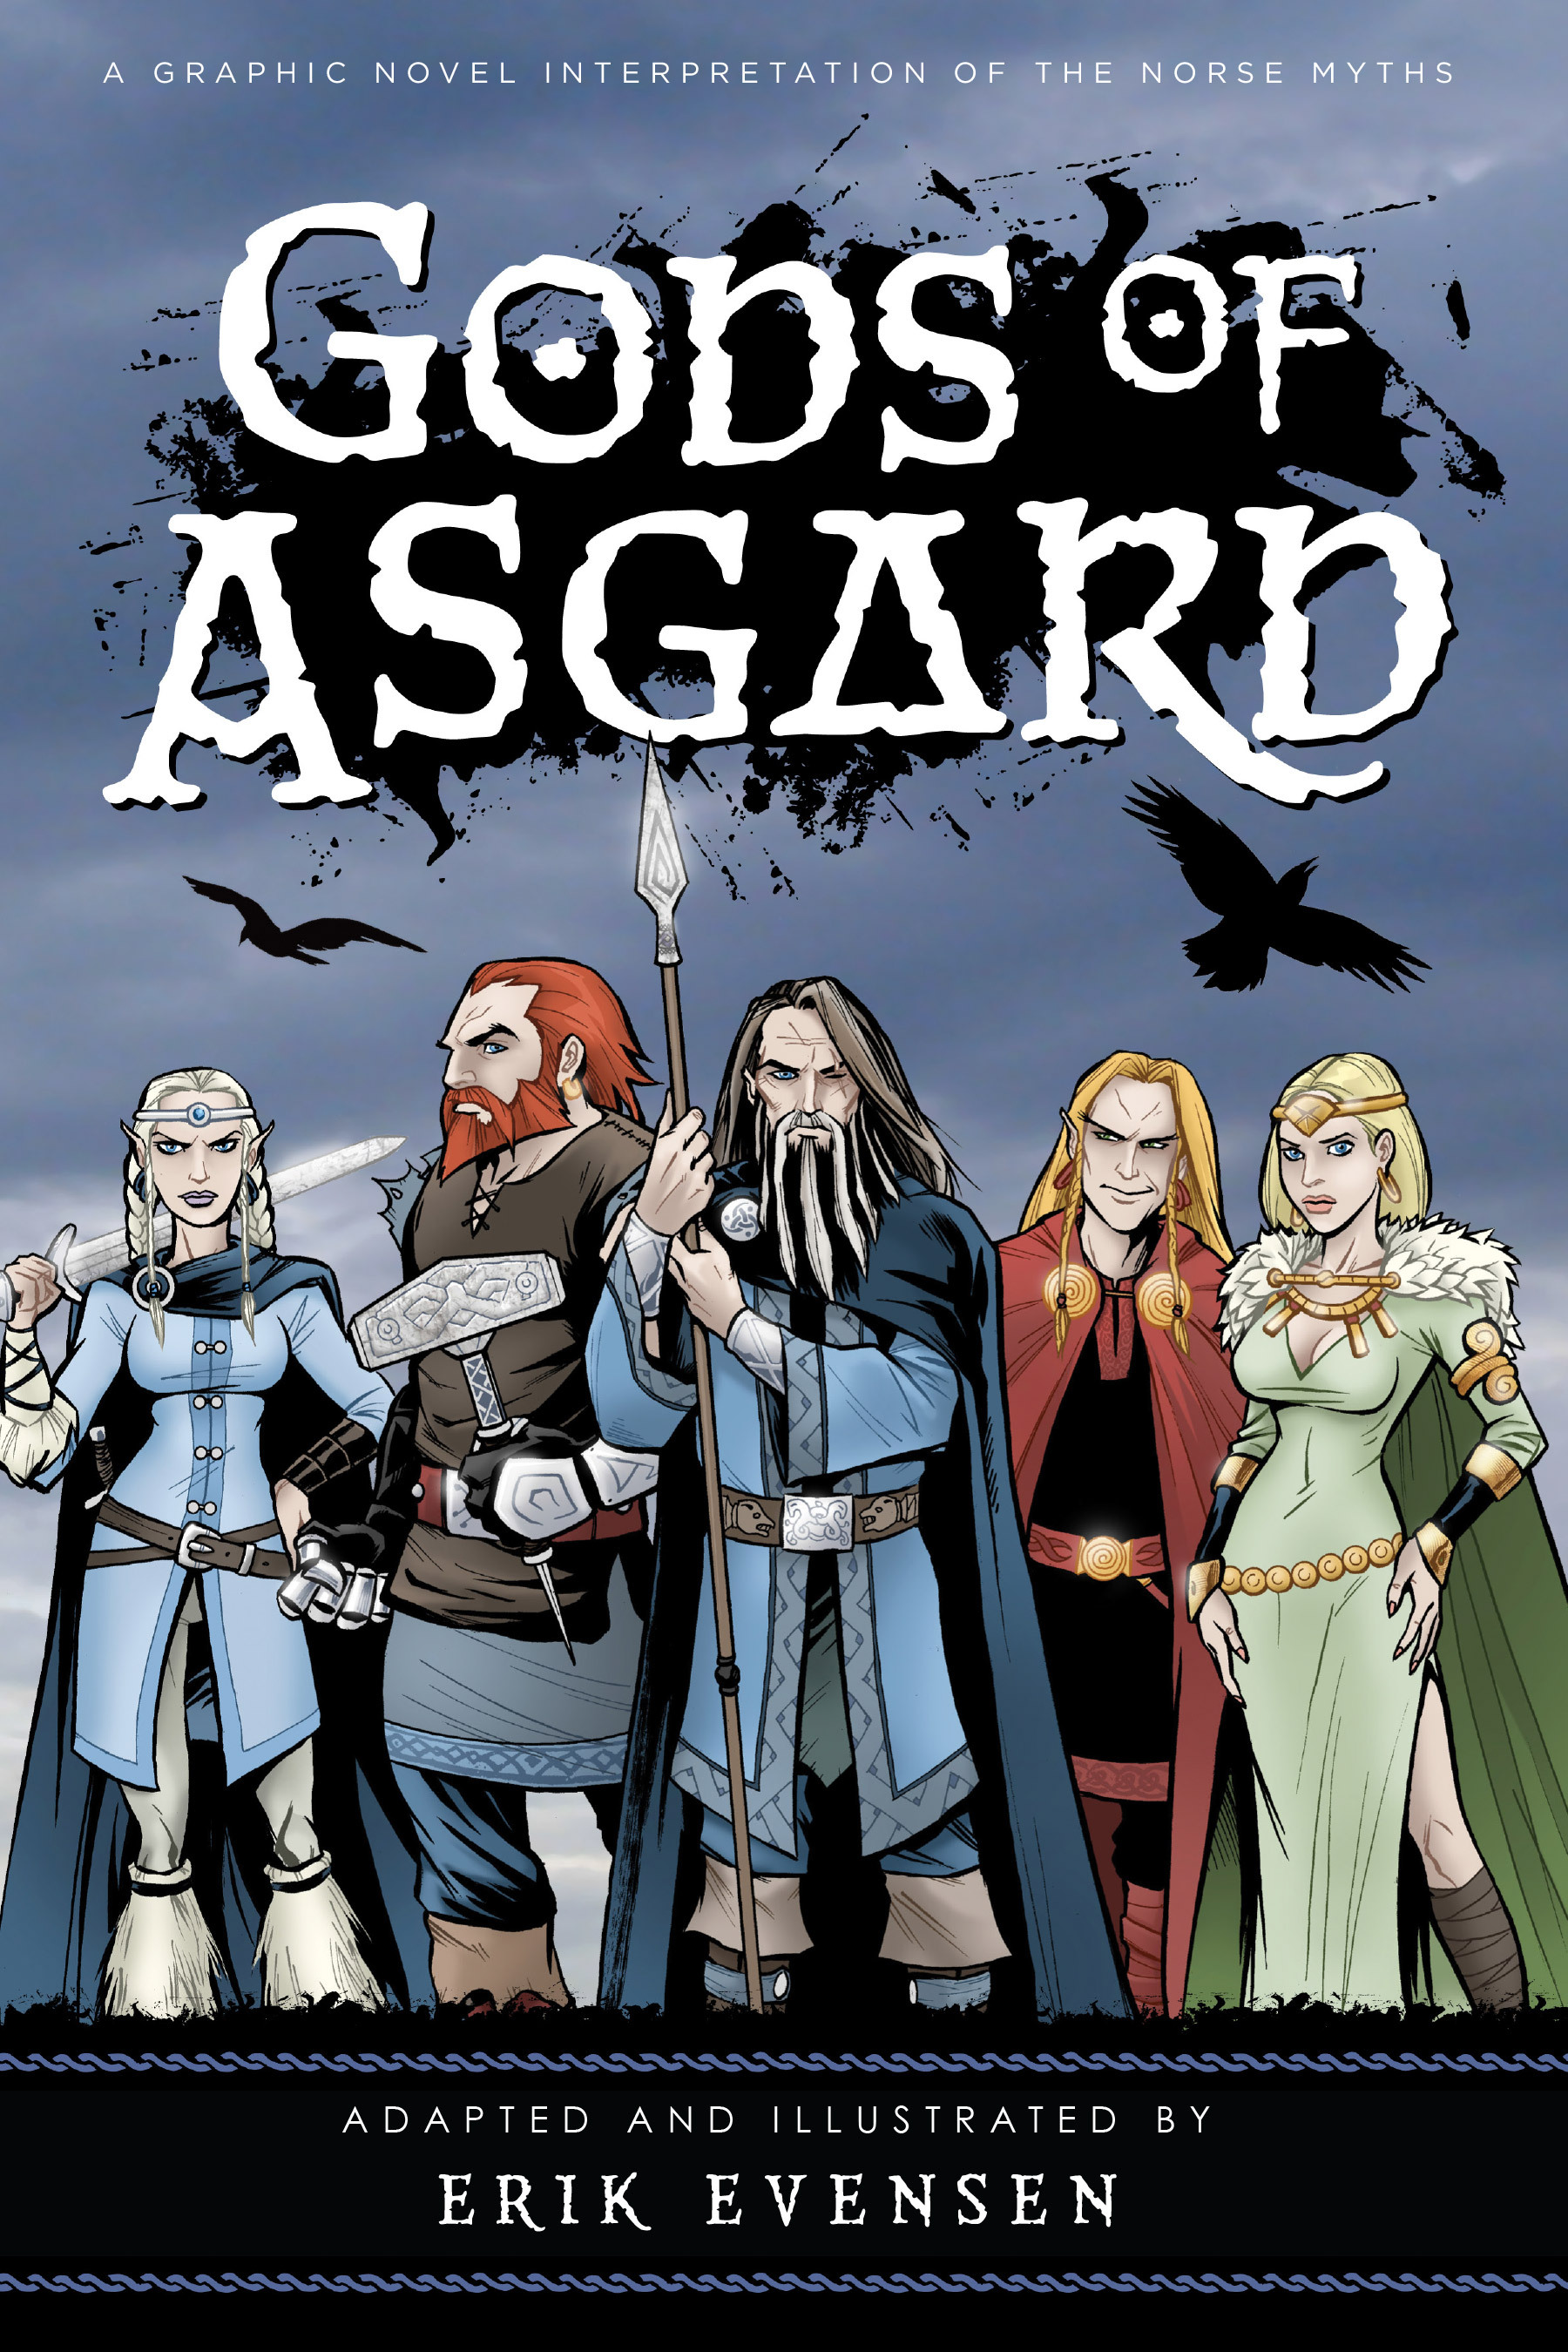 Read online Gods of Asgard comic -  Issue # TPB (Part 1) - 1